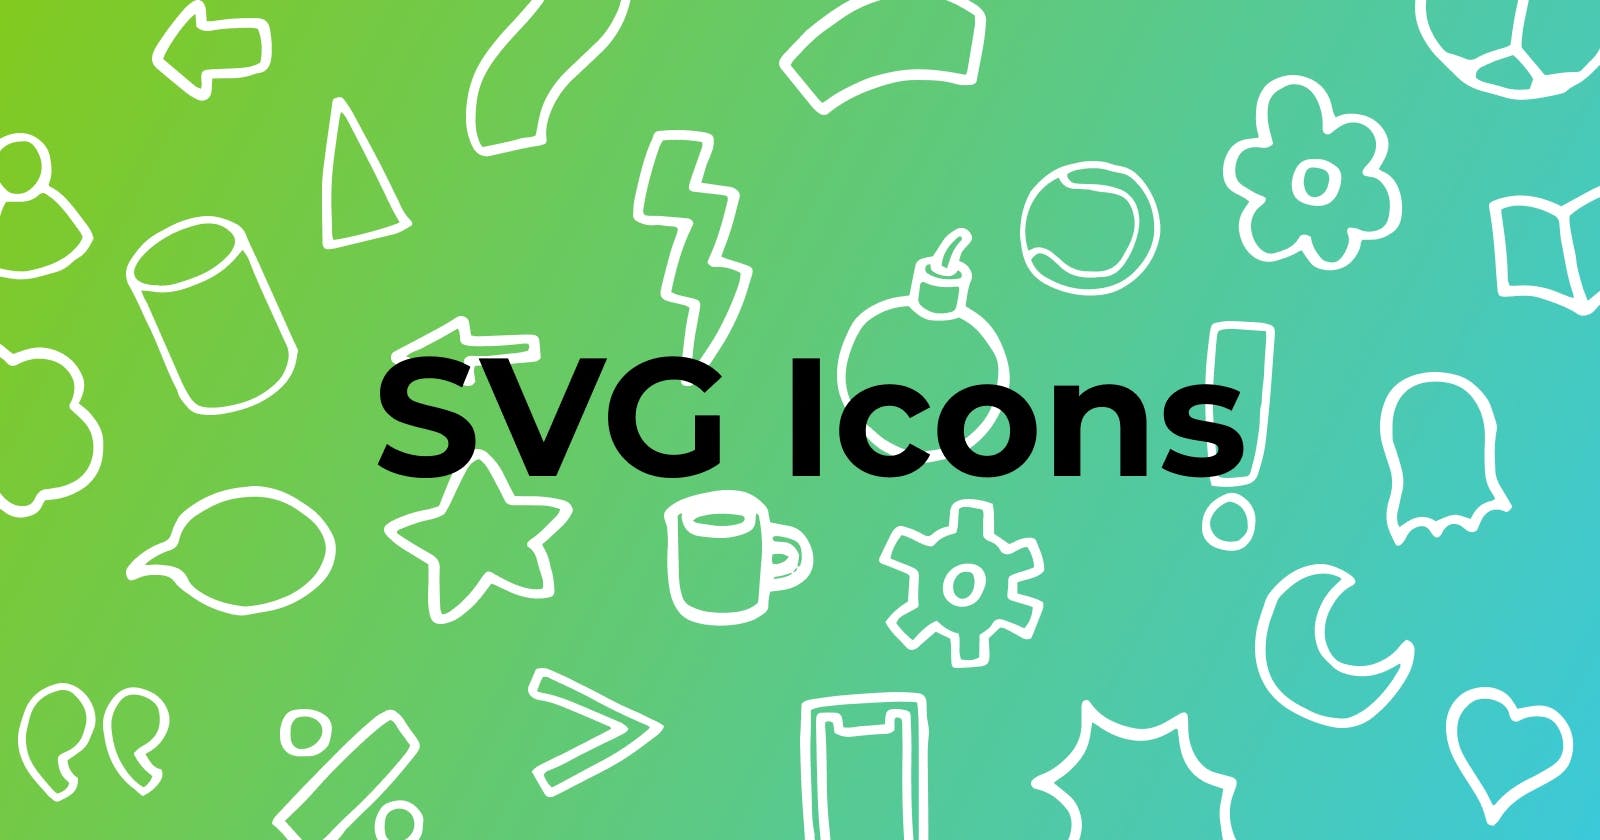 SVG Icons - Free Downloads